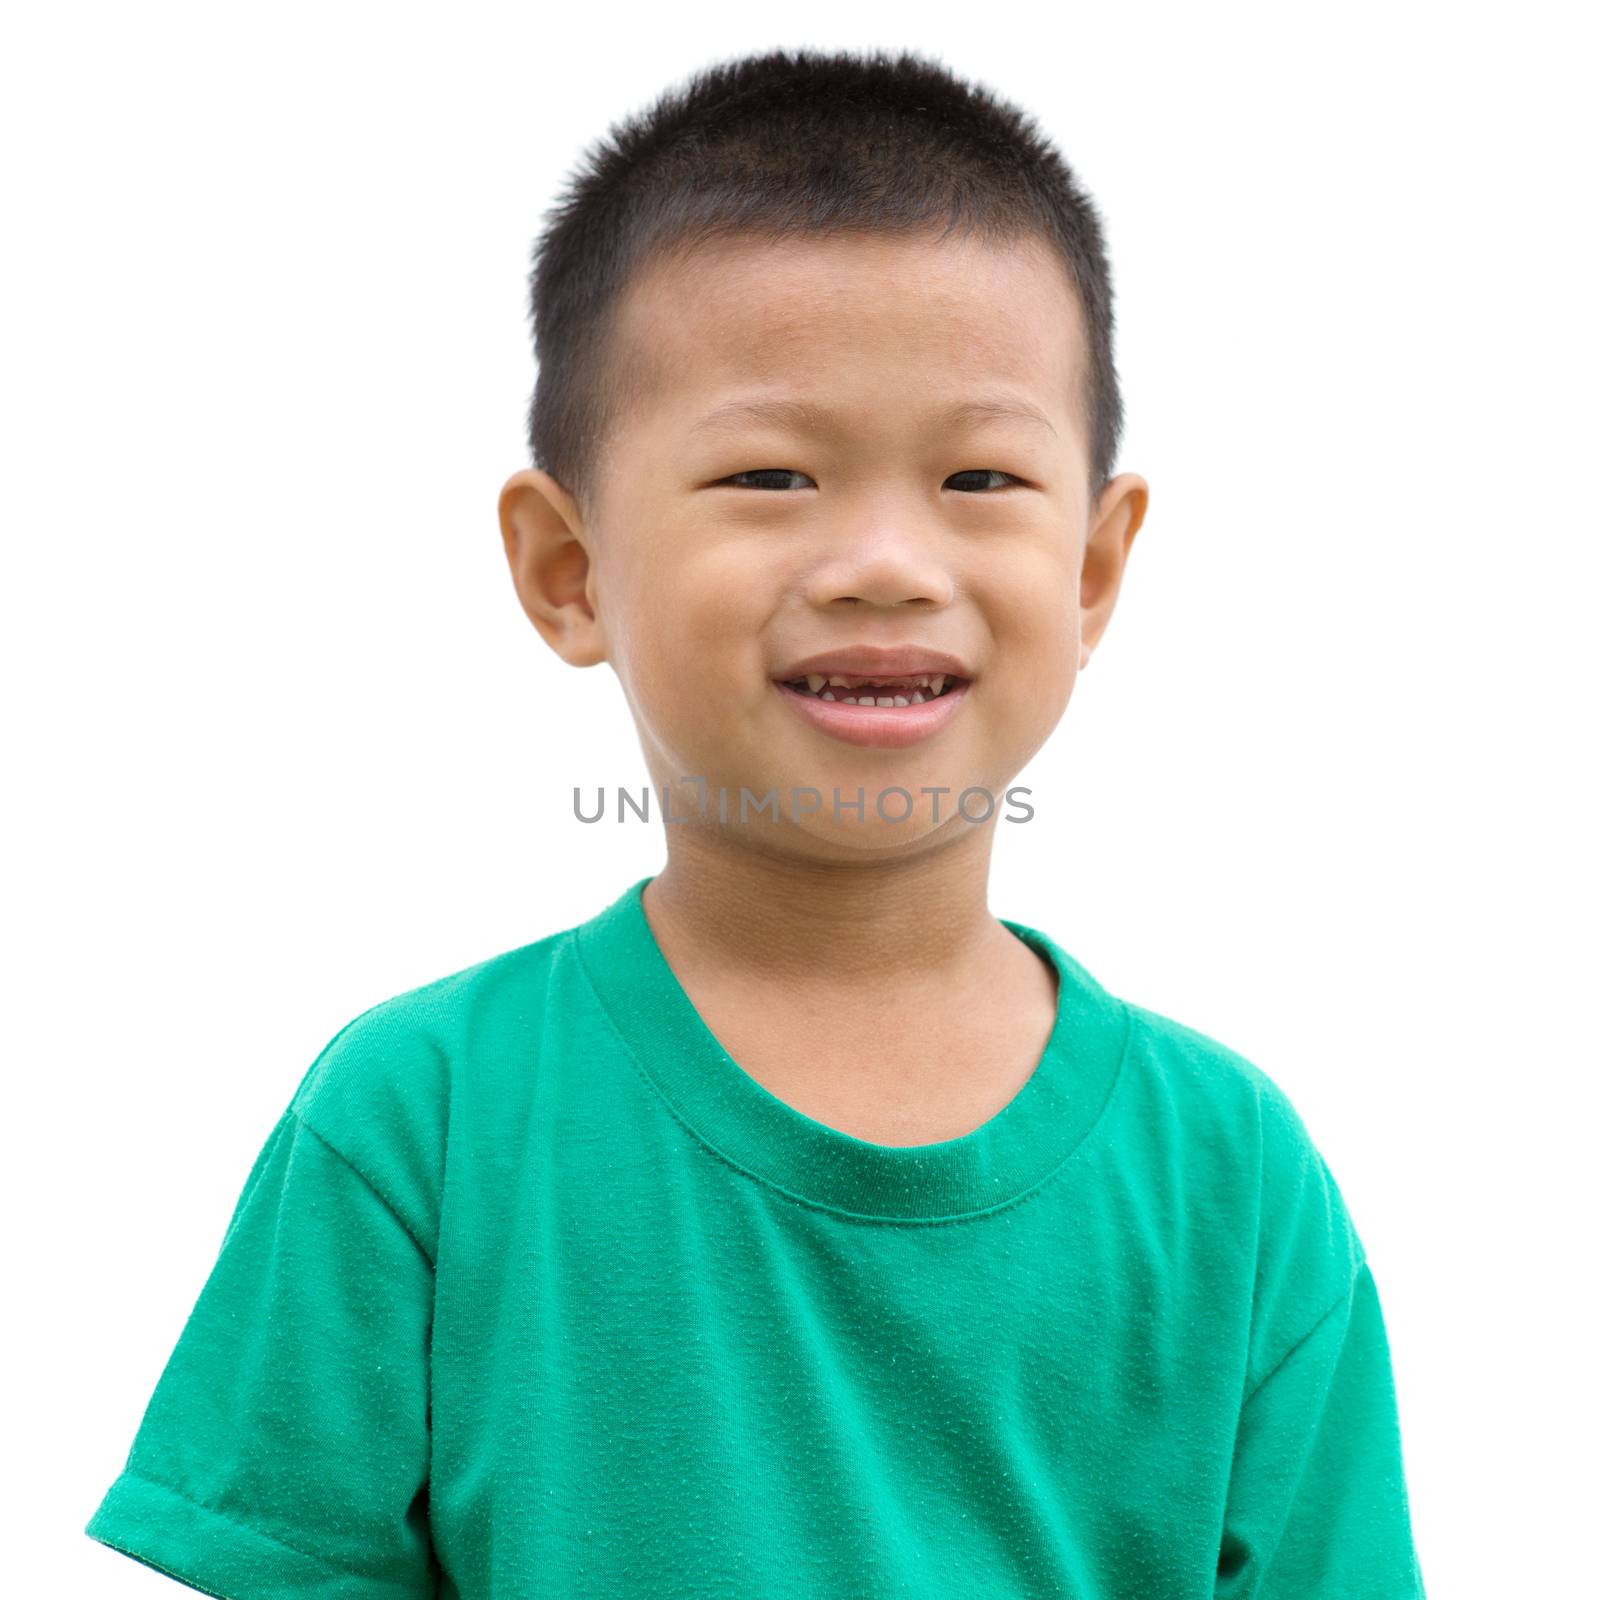 Headshot of happy Asian child smiling and looking at camera. Portrait of young boy isolated on white background.